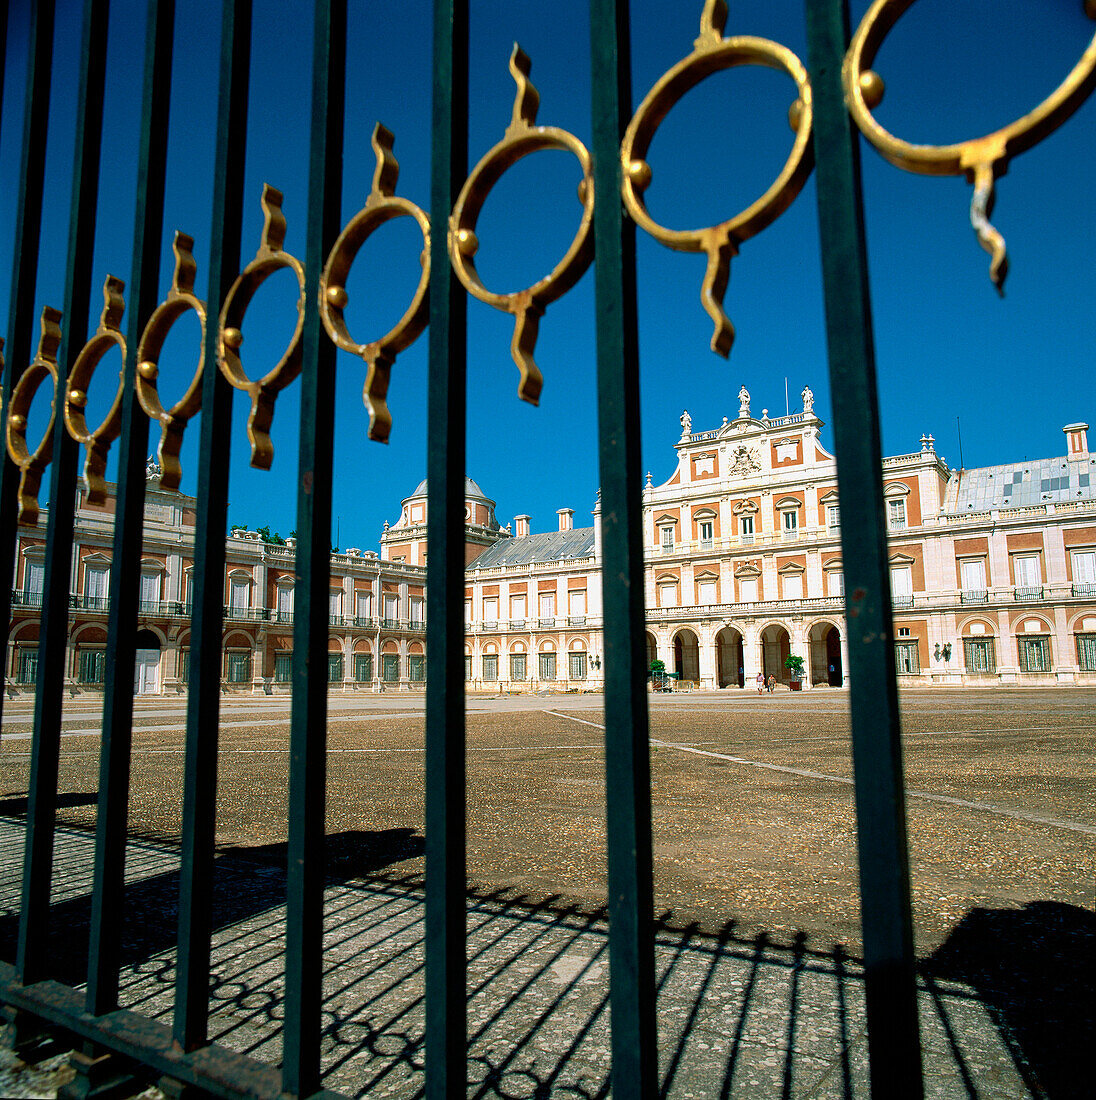  Aranjuez, Architecture, Bar, Bars, Building, Buildings, Color, Colour, Daytime, Detail, Details, Europe, Exterior, Madrid province, Outdoor, Outdoors, Outside, Palace, Palaces, Palacio Real, Royal Palace, Shadow, Shadows, Spain, Square, Travel, Travels, 